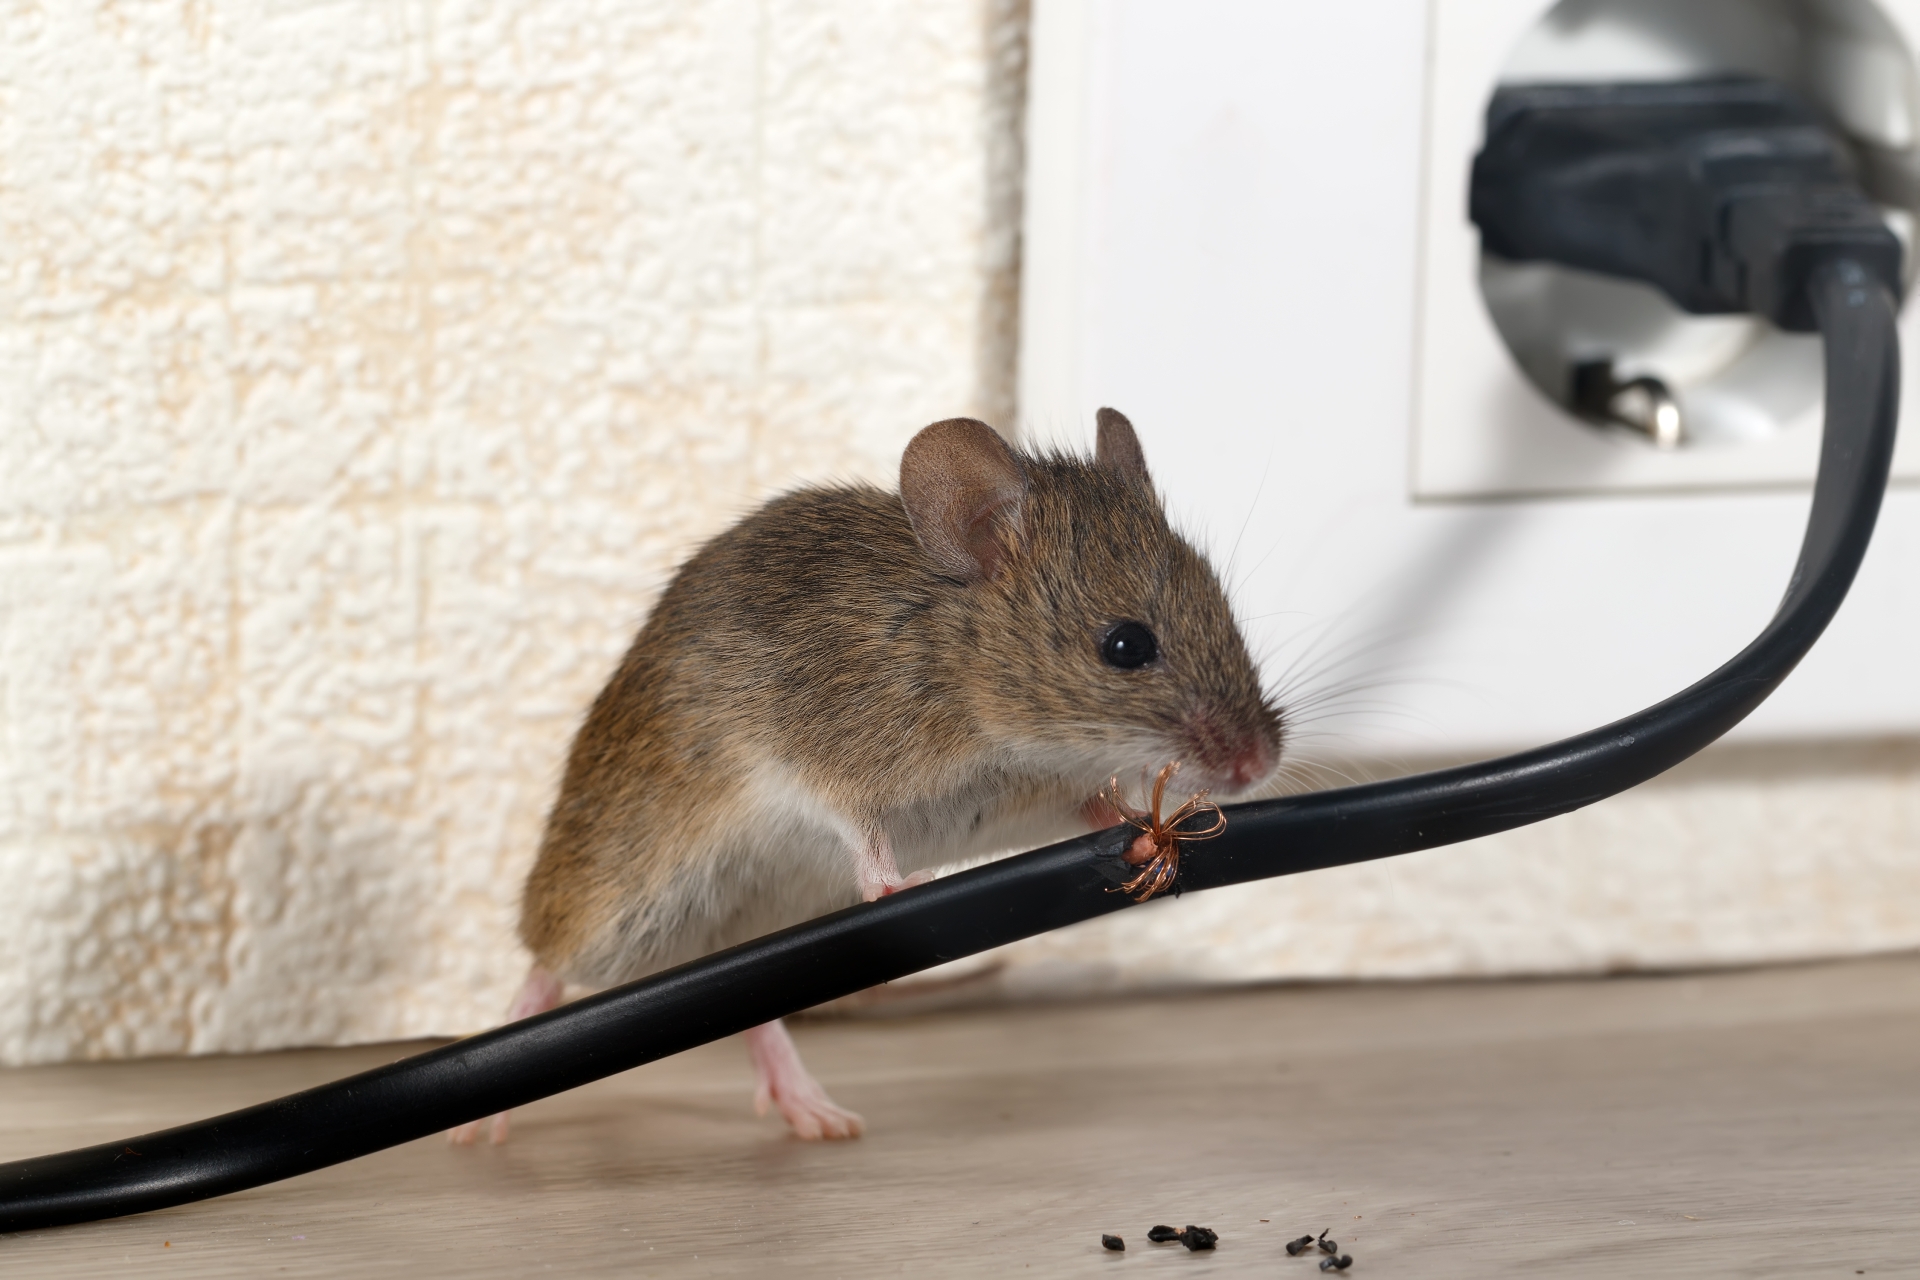 Mice Infestation, Pest Control in Wimbledon, SW19. Call Now 020 8166 9746